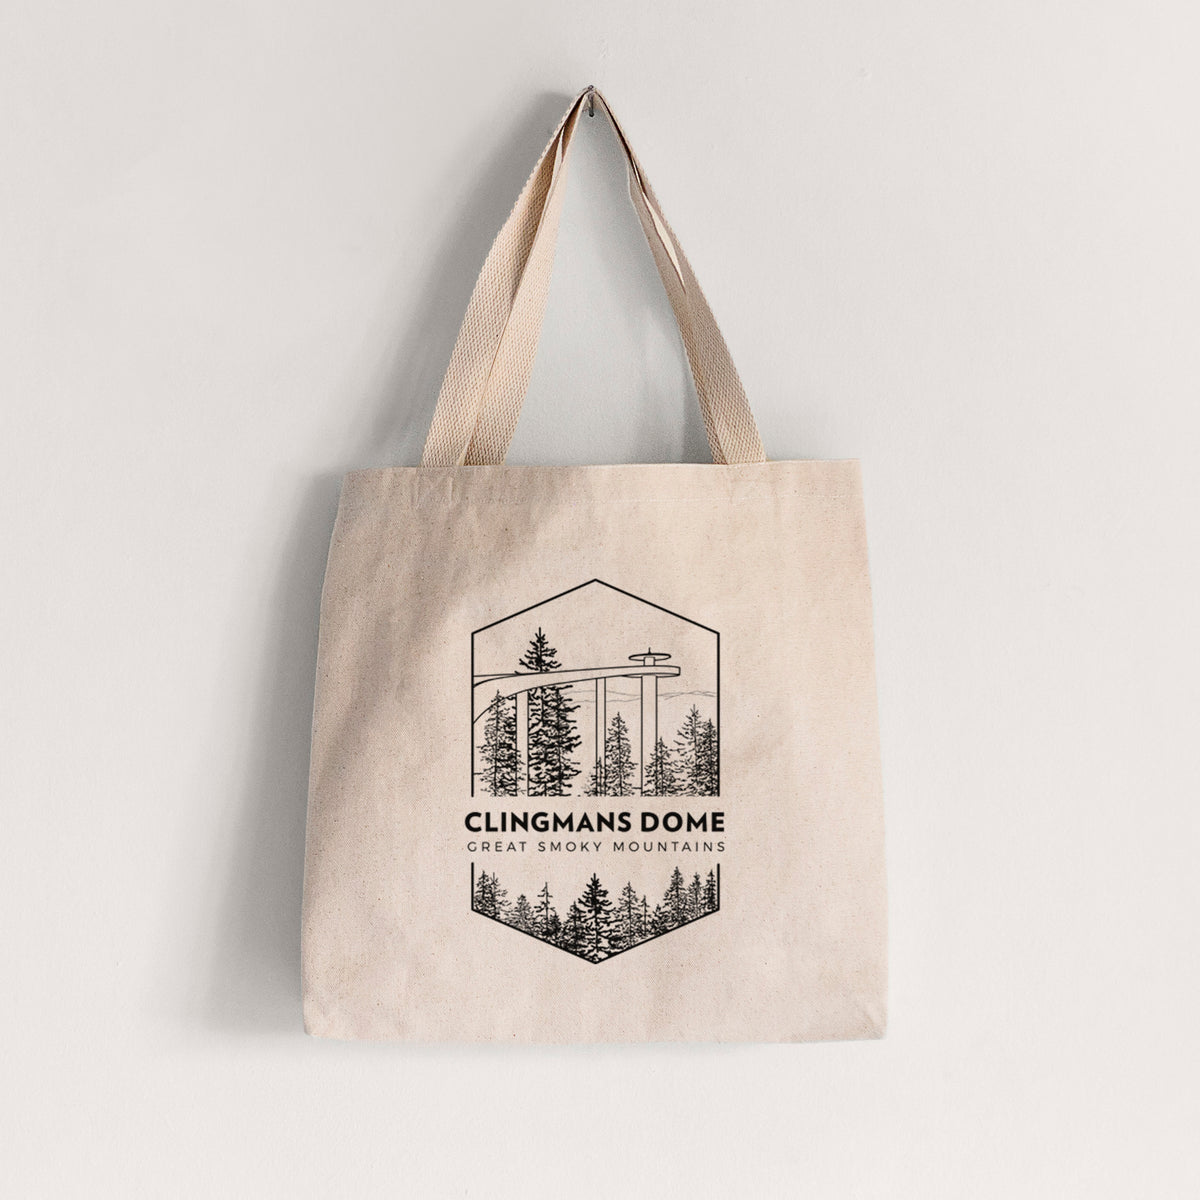 Clingmans Dome - Great Smoky Mountains National Park - Tote Bag